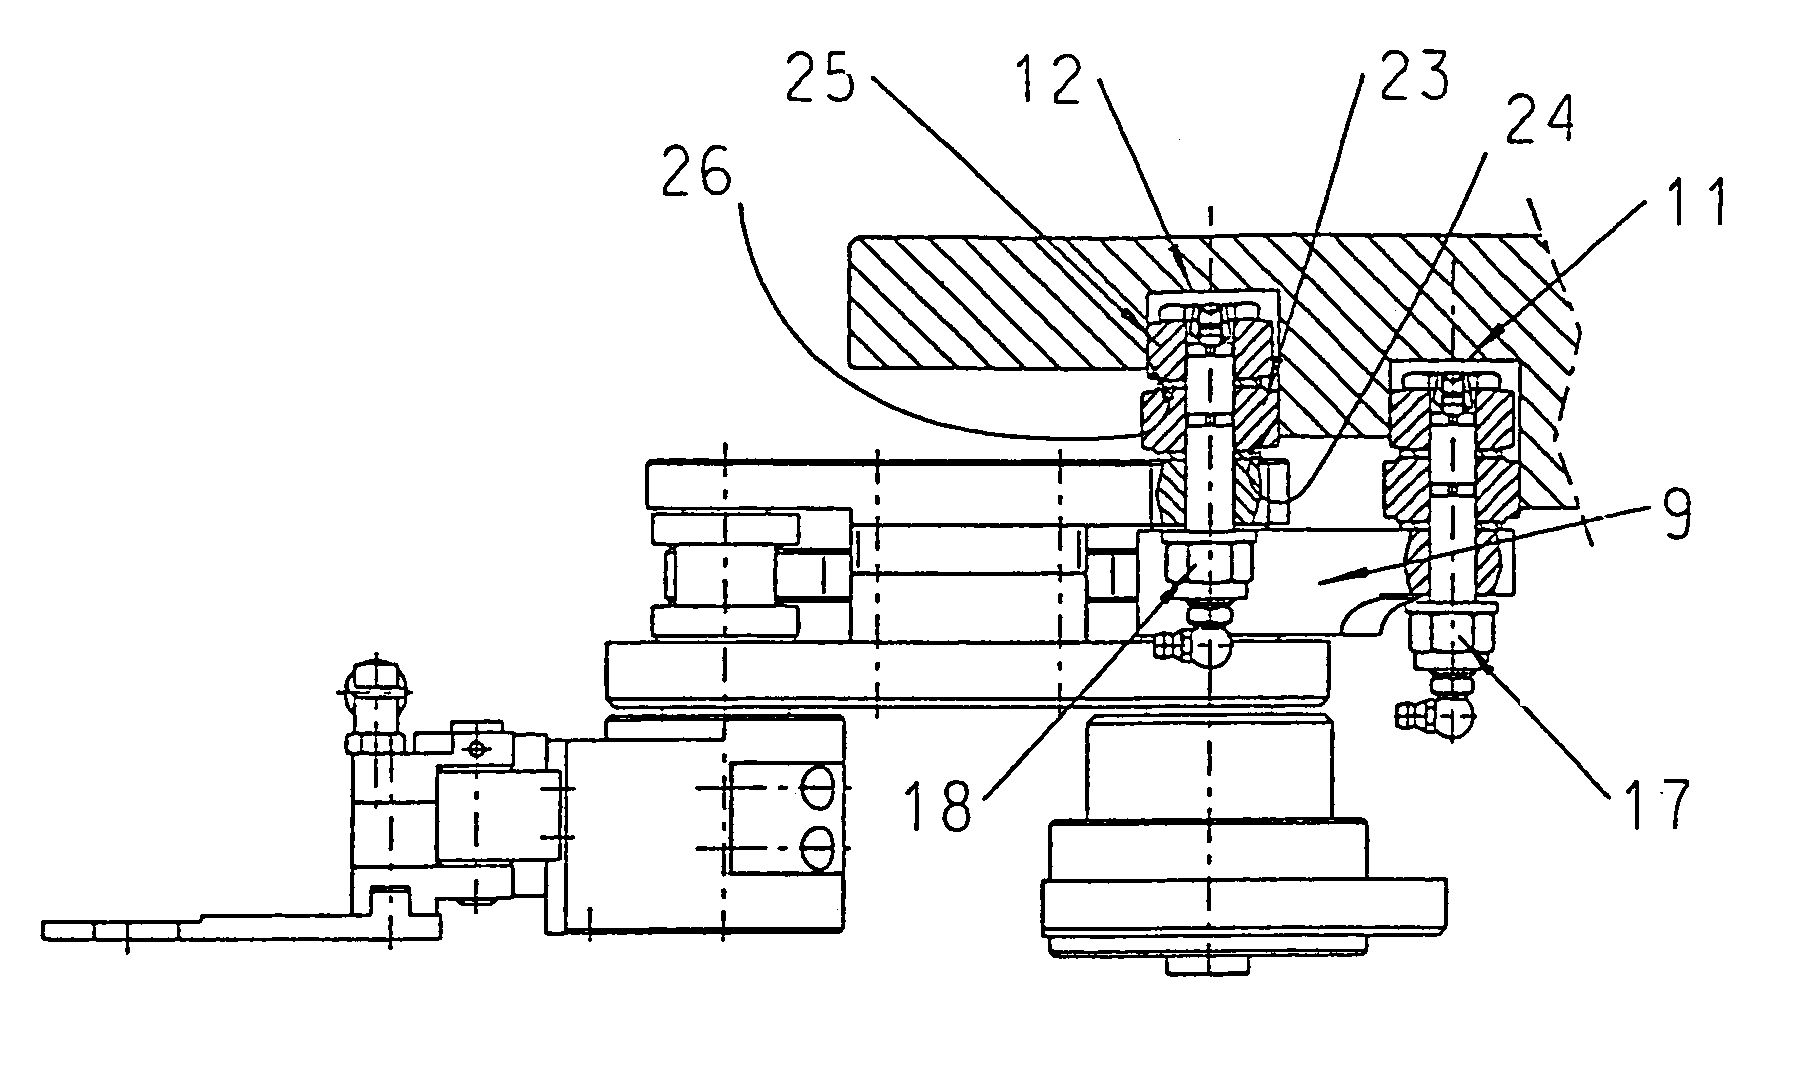 Variable-pitch arm star construction for rotary molding machines for making, by drawing and blowing, plastic vessels and bottles, and rotary molding machine comprising the star construction